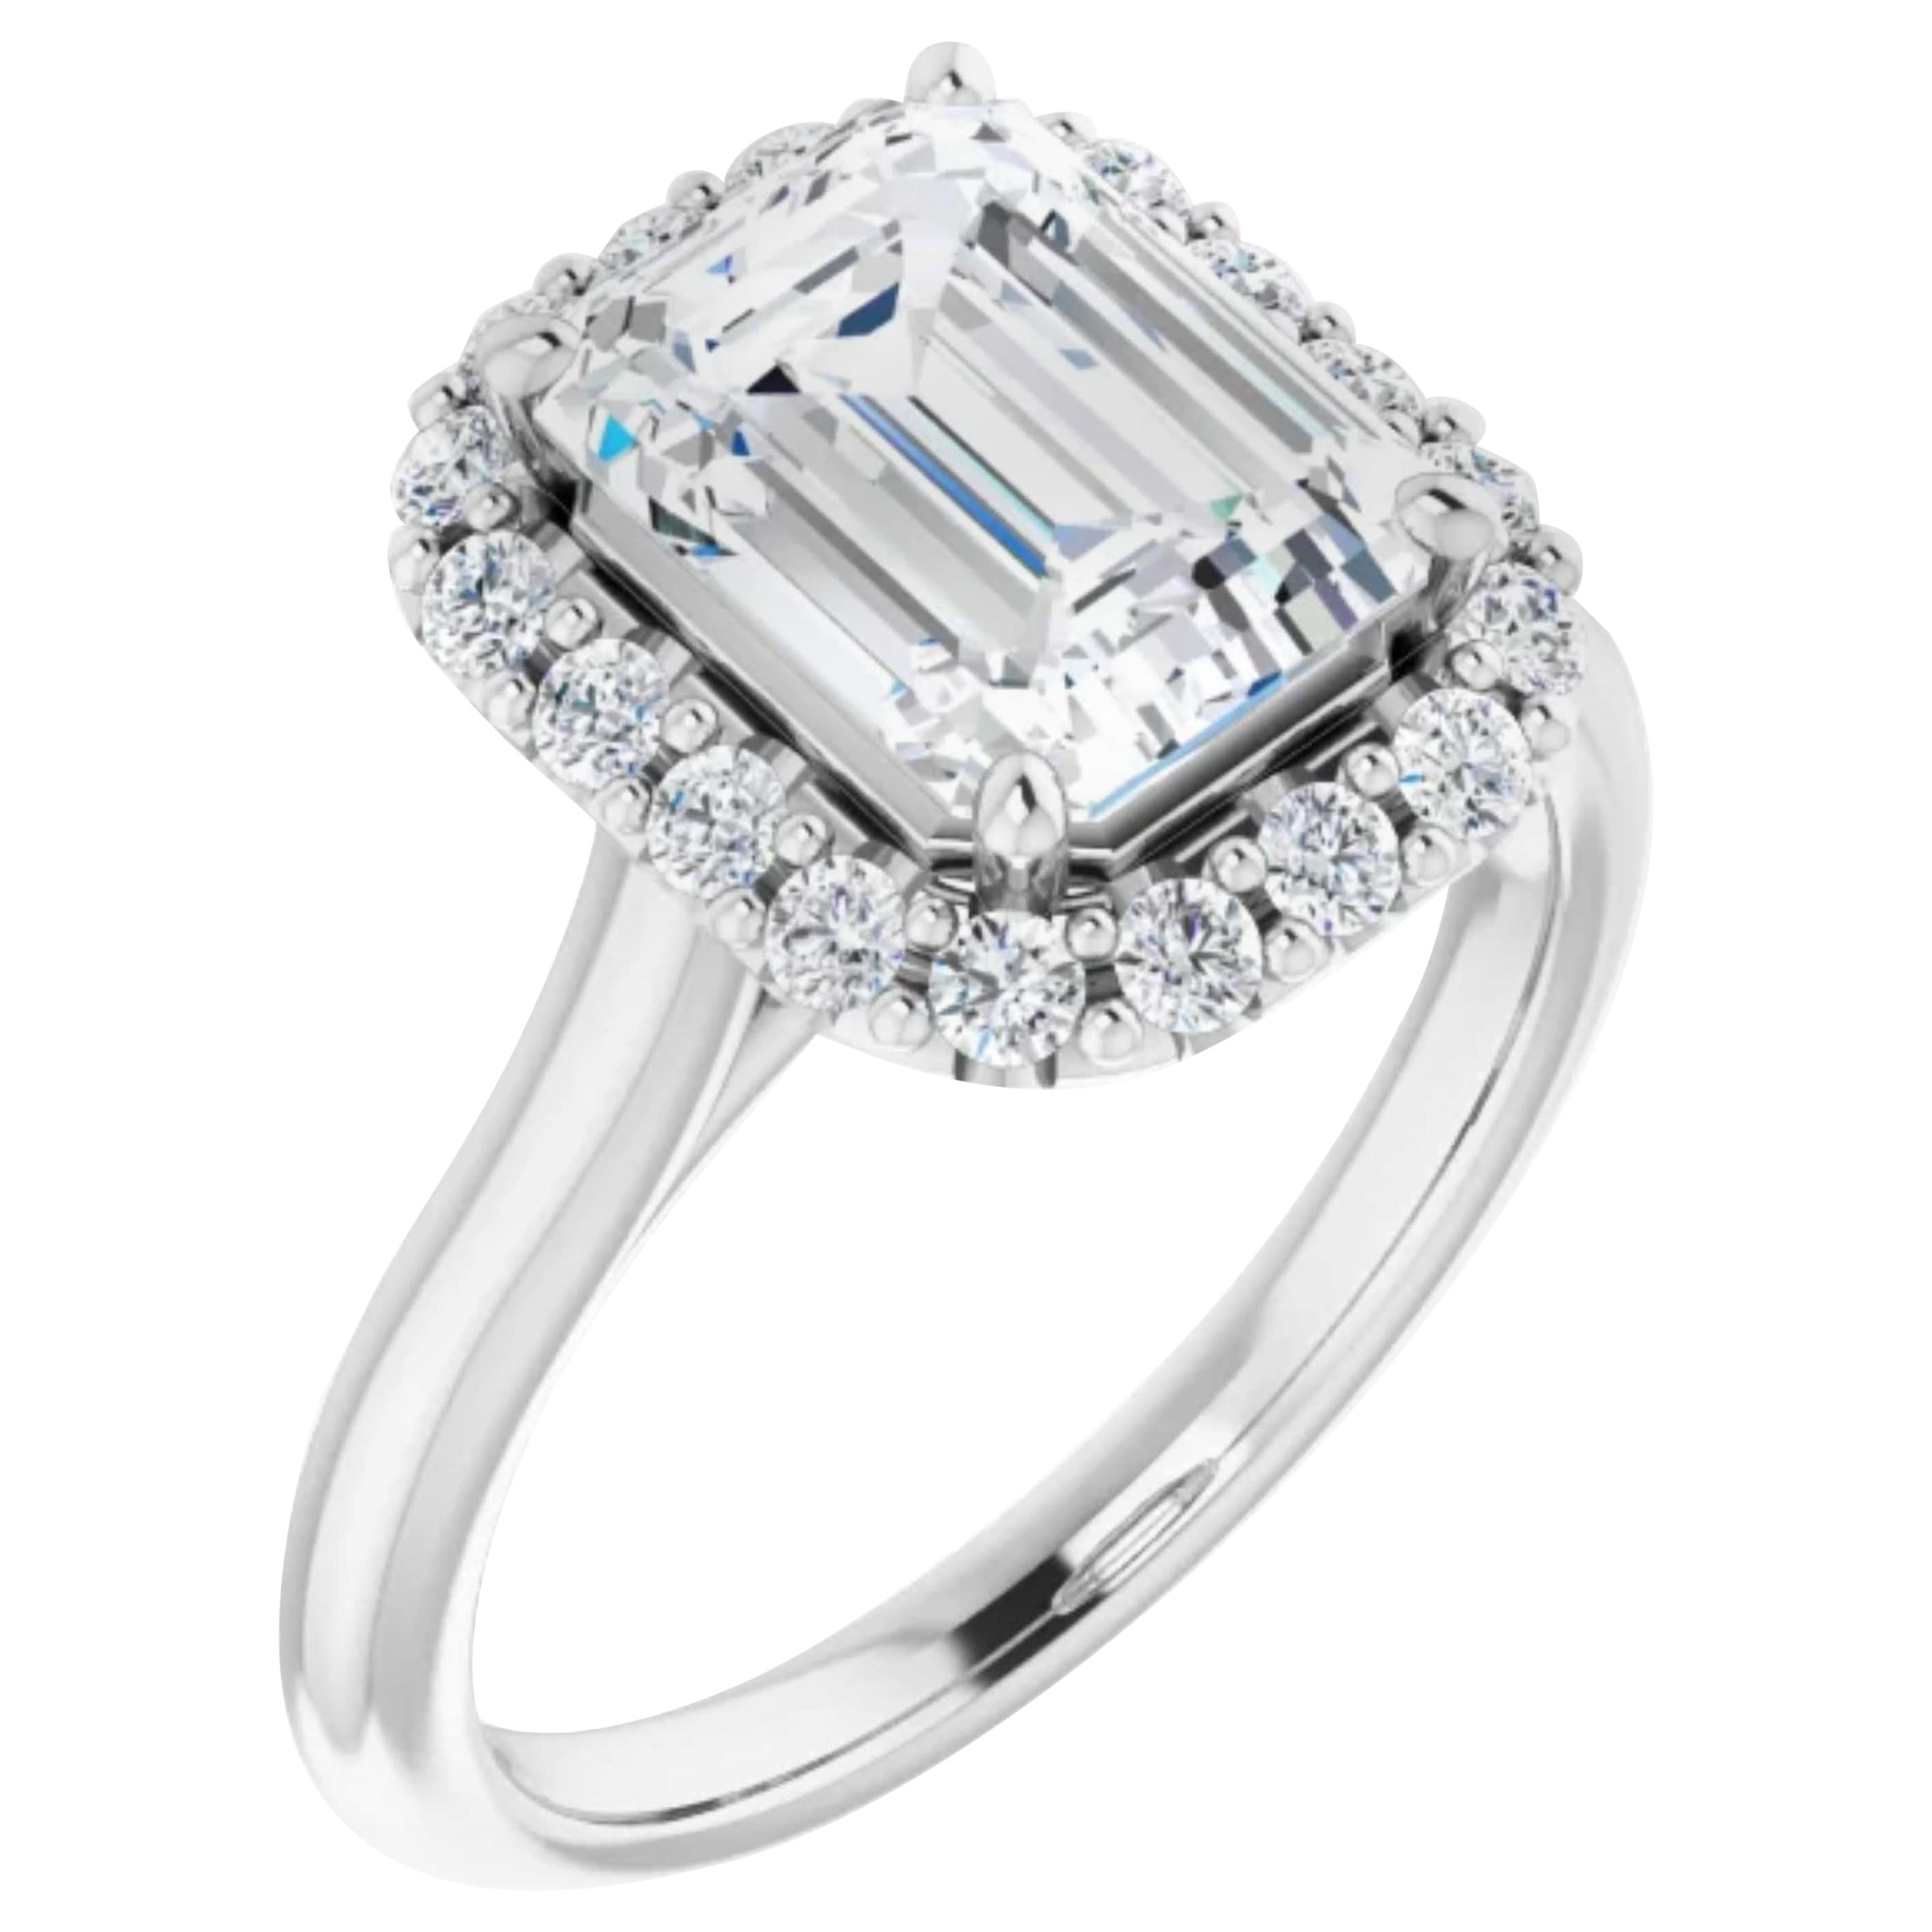 Halo Emerald Cut Diamond Engagement Ring White Gold For Sale